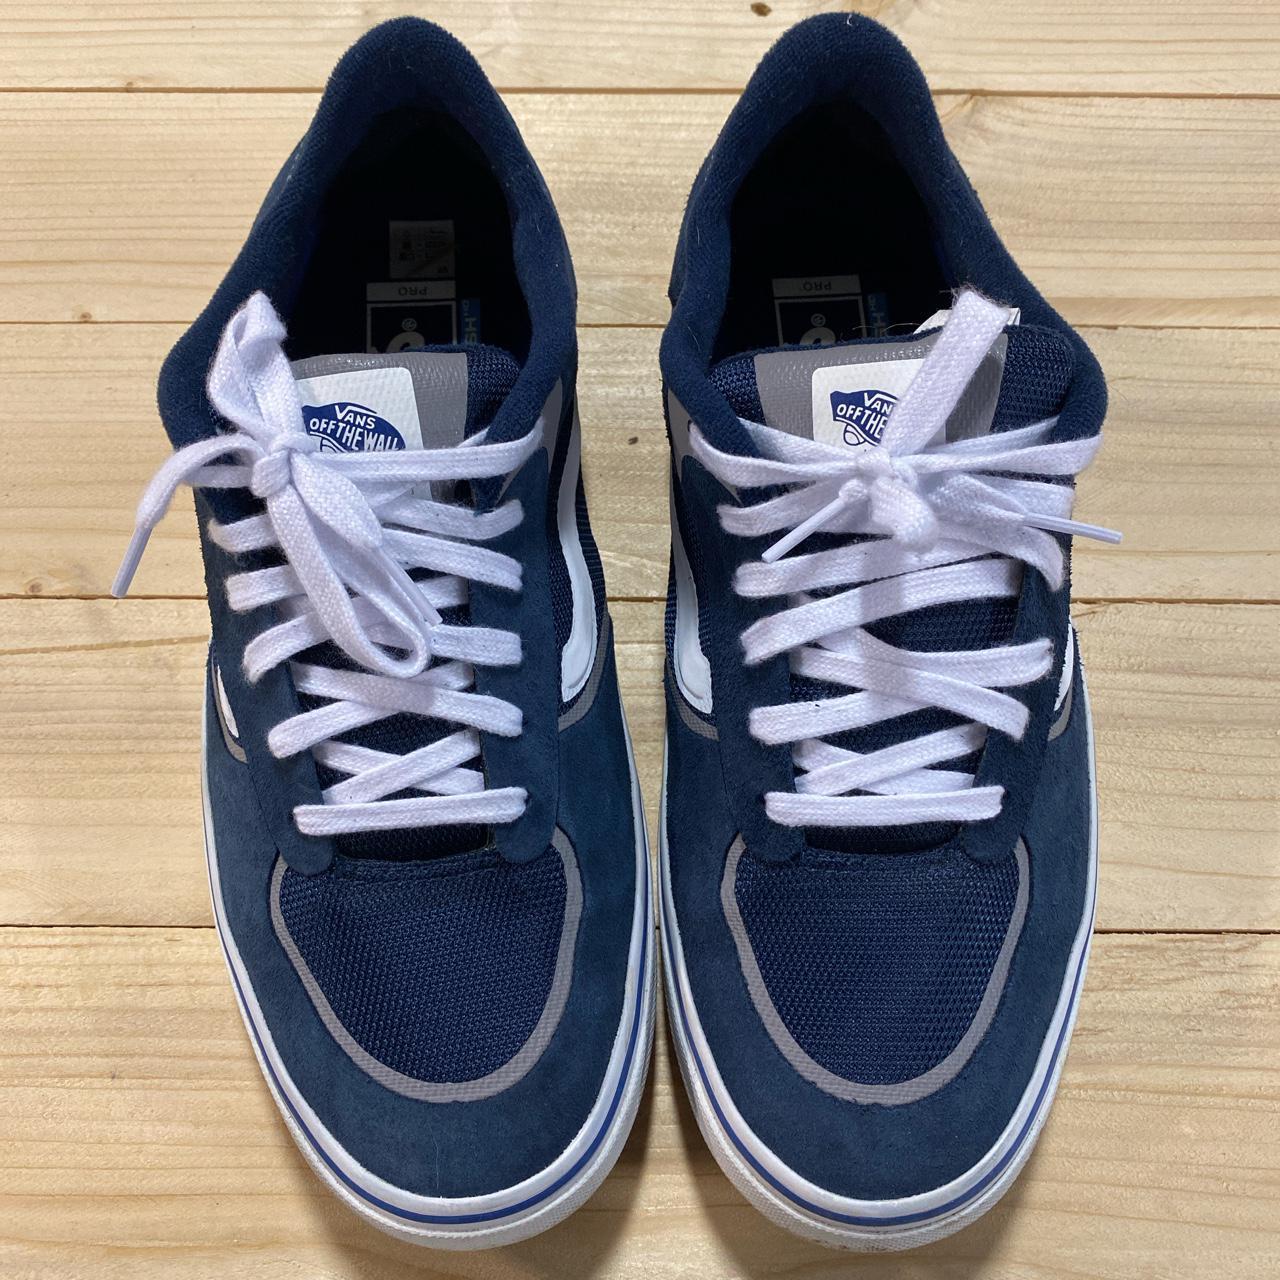 Vans Men's Blue and White Trainers (3)